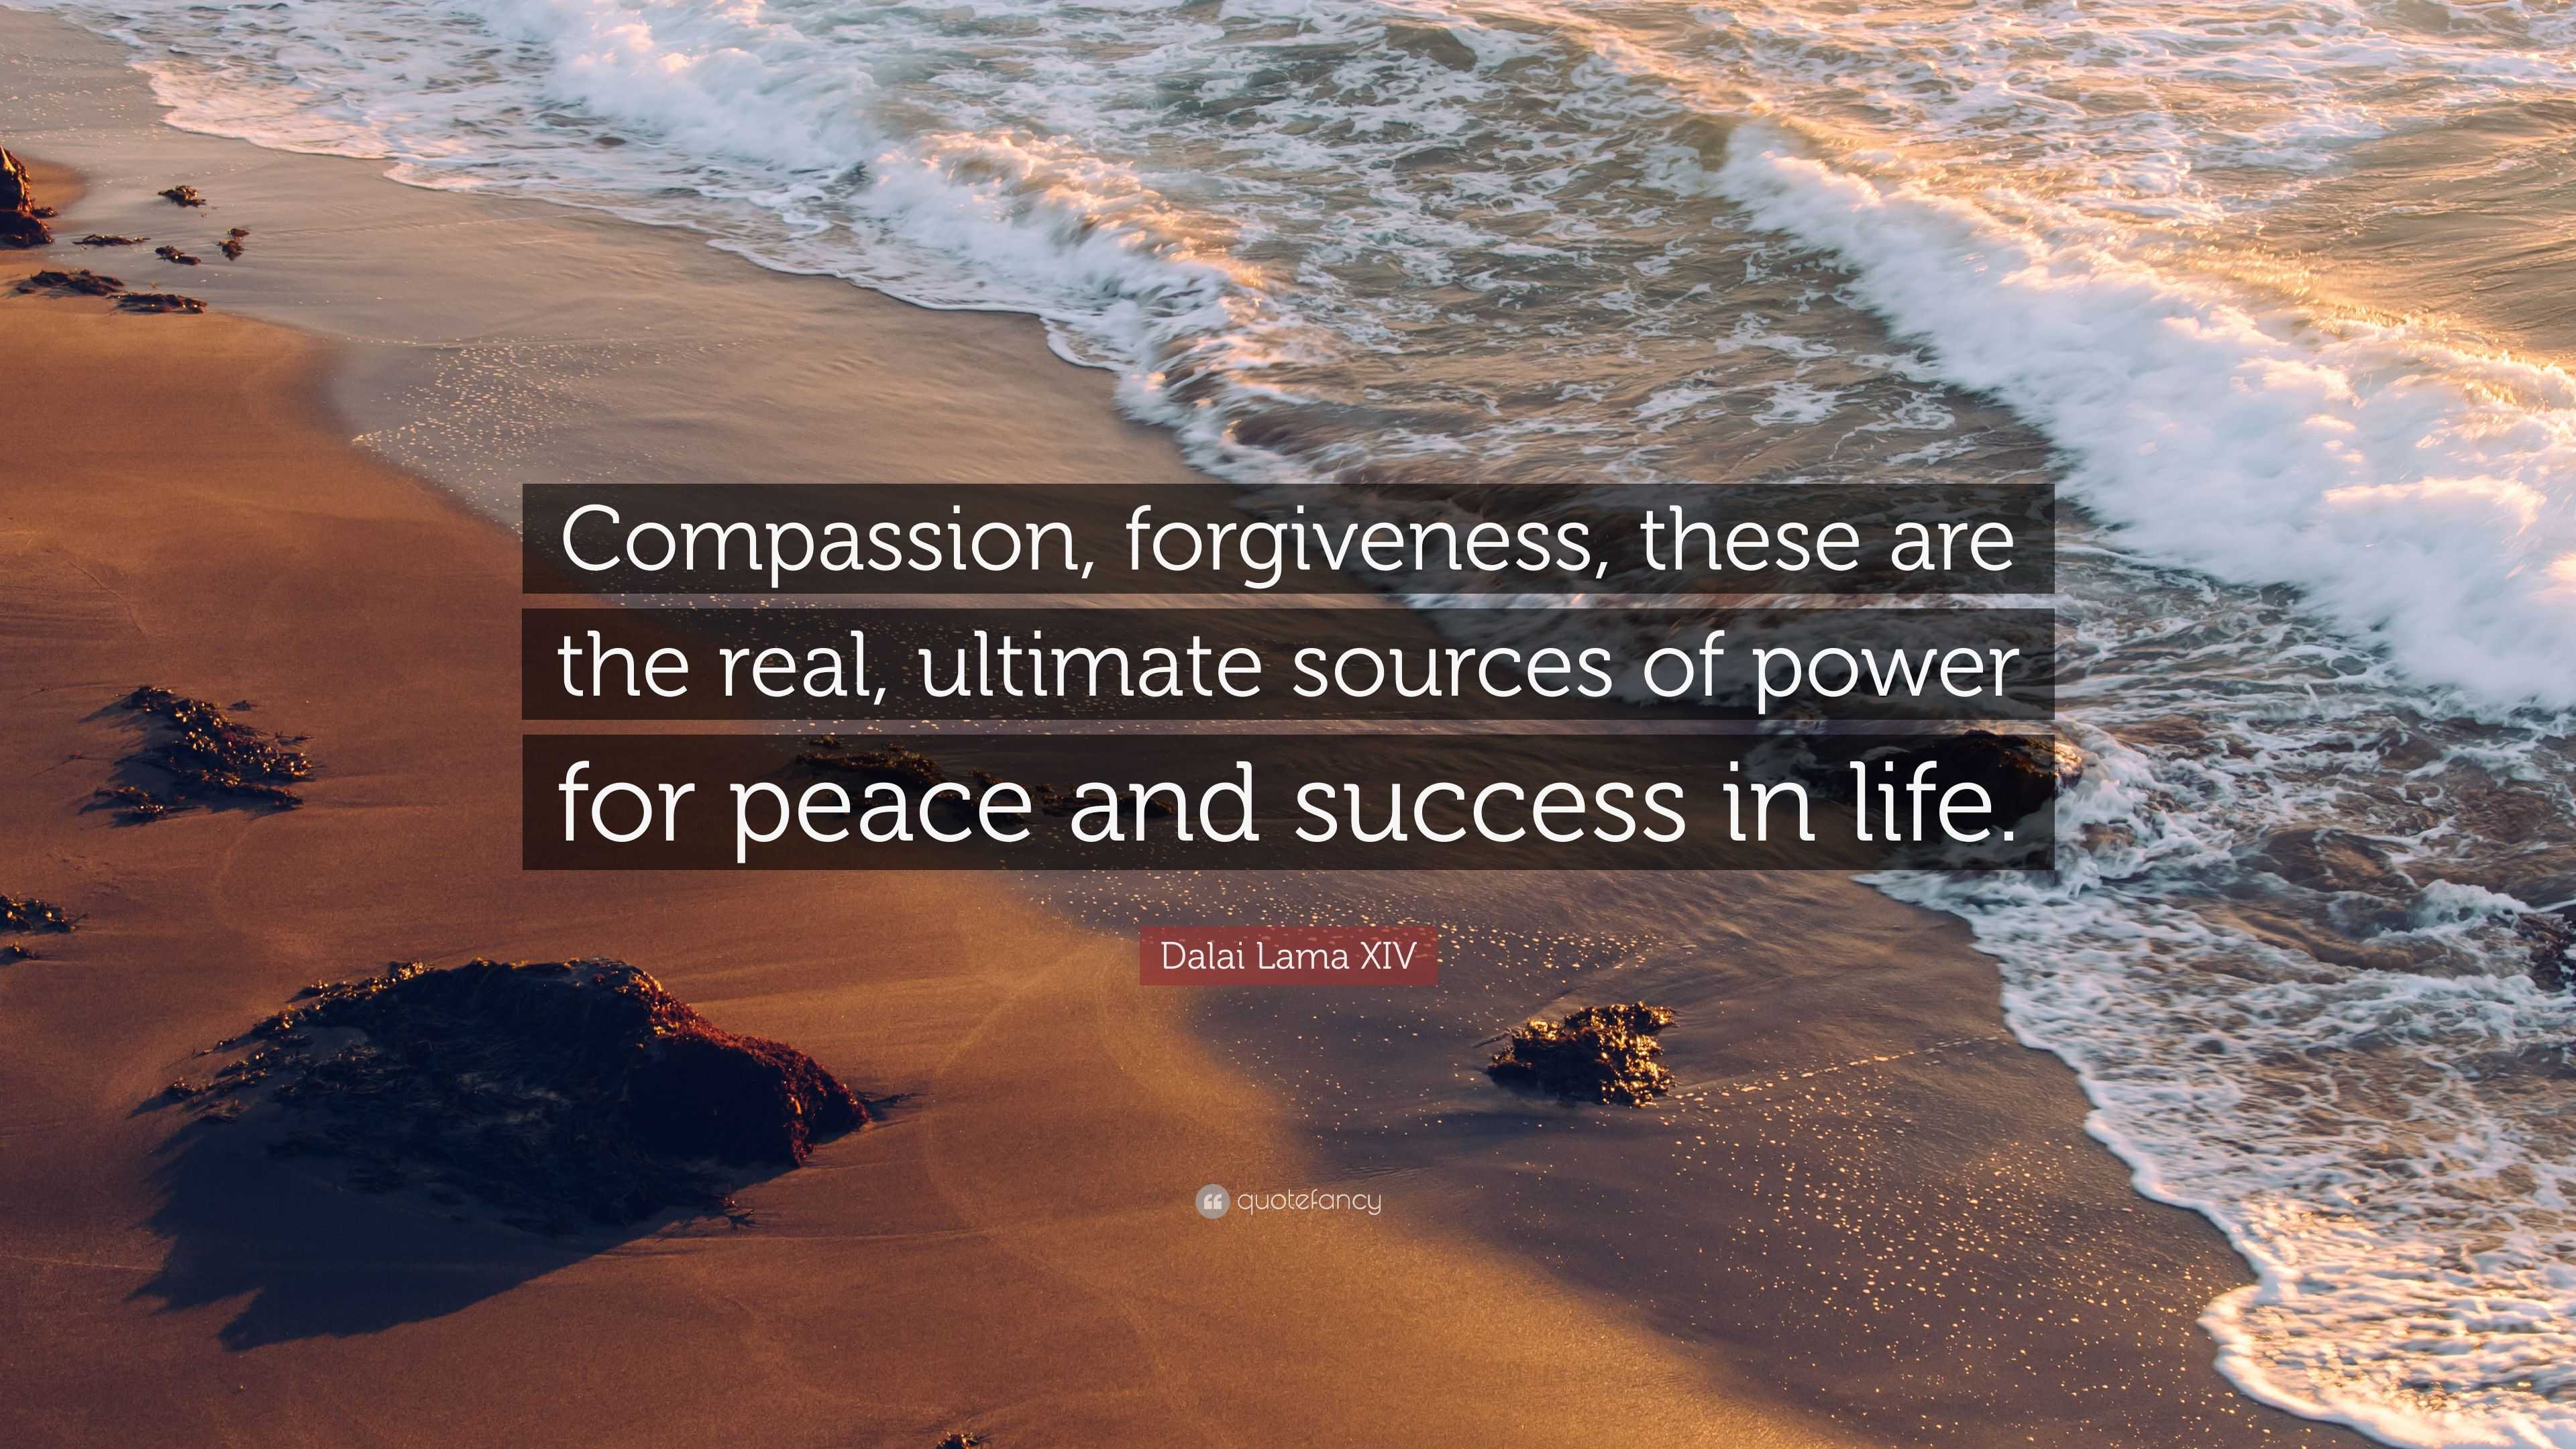 Dalai Lama XIV Quote: “Compassion, forgiveness, these are the real